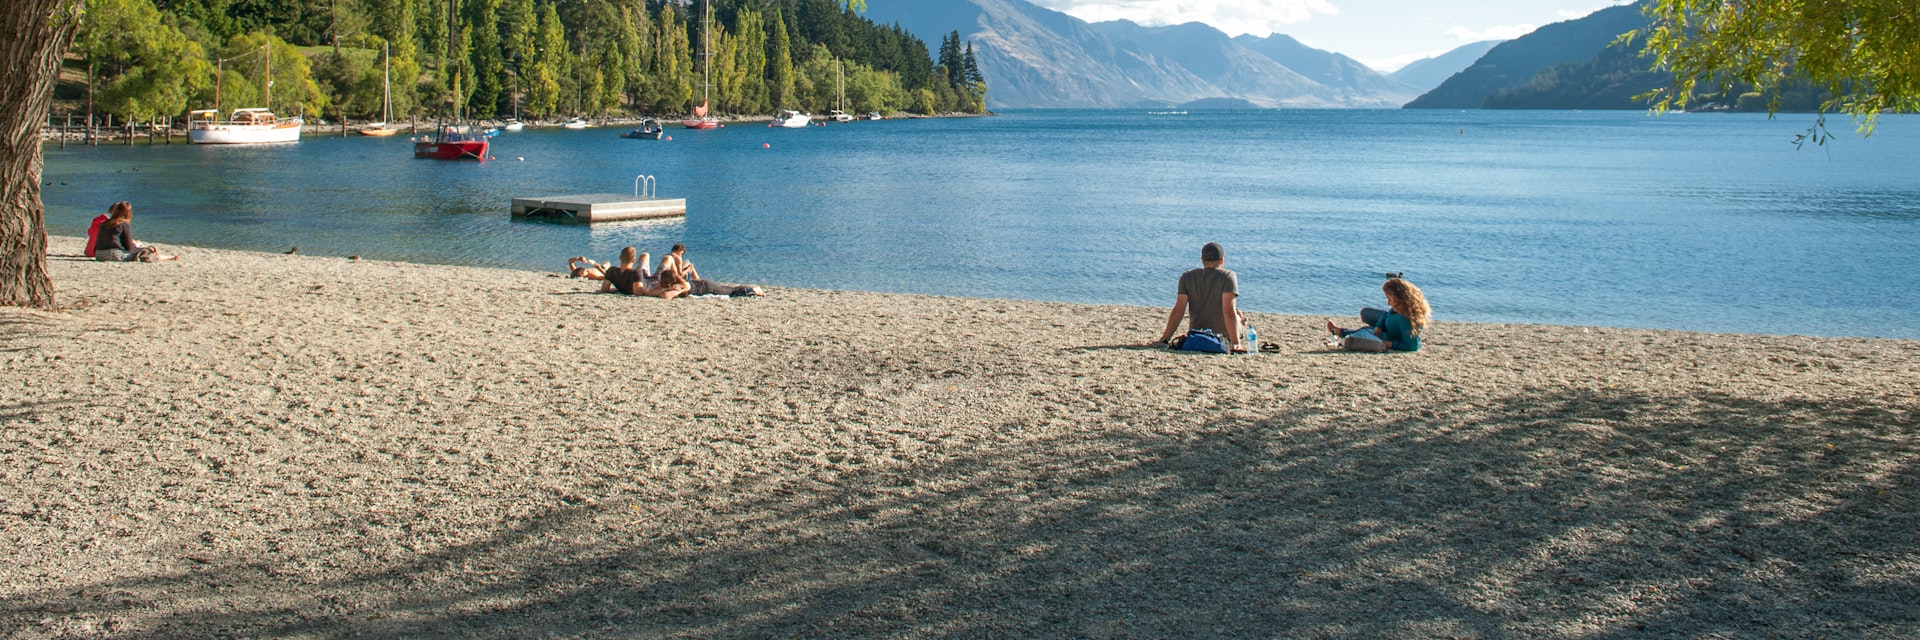 Tourists relax at the shore of Lake Wakatipu in Queenstown.